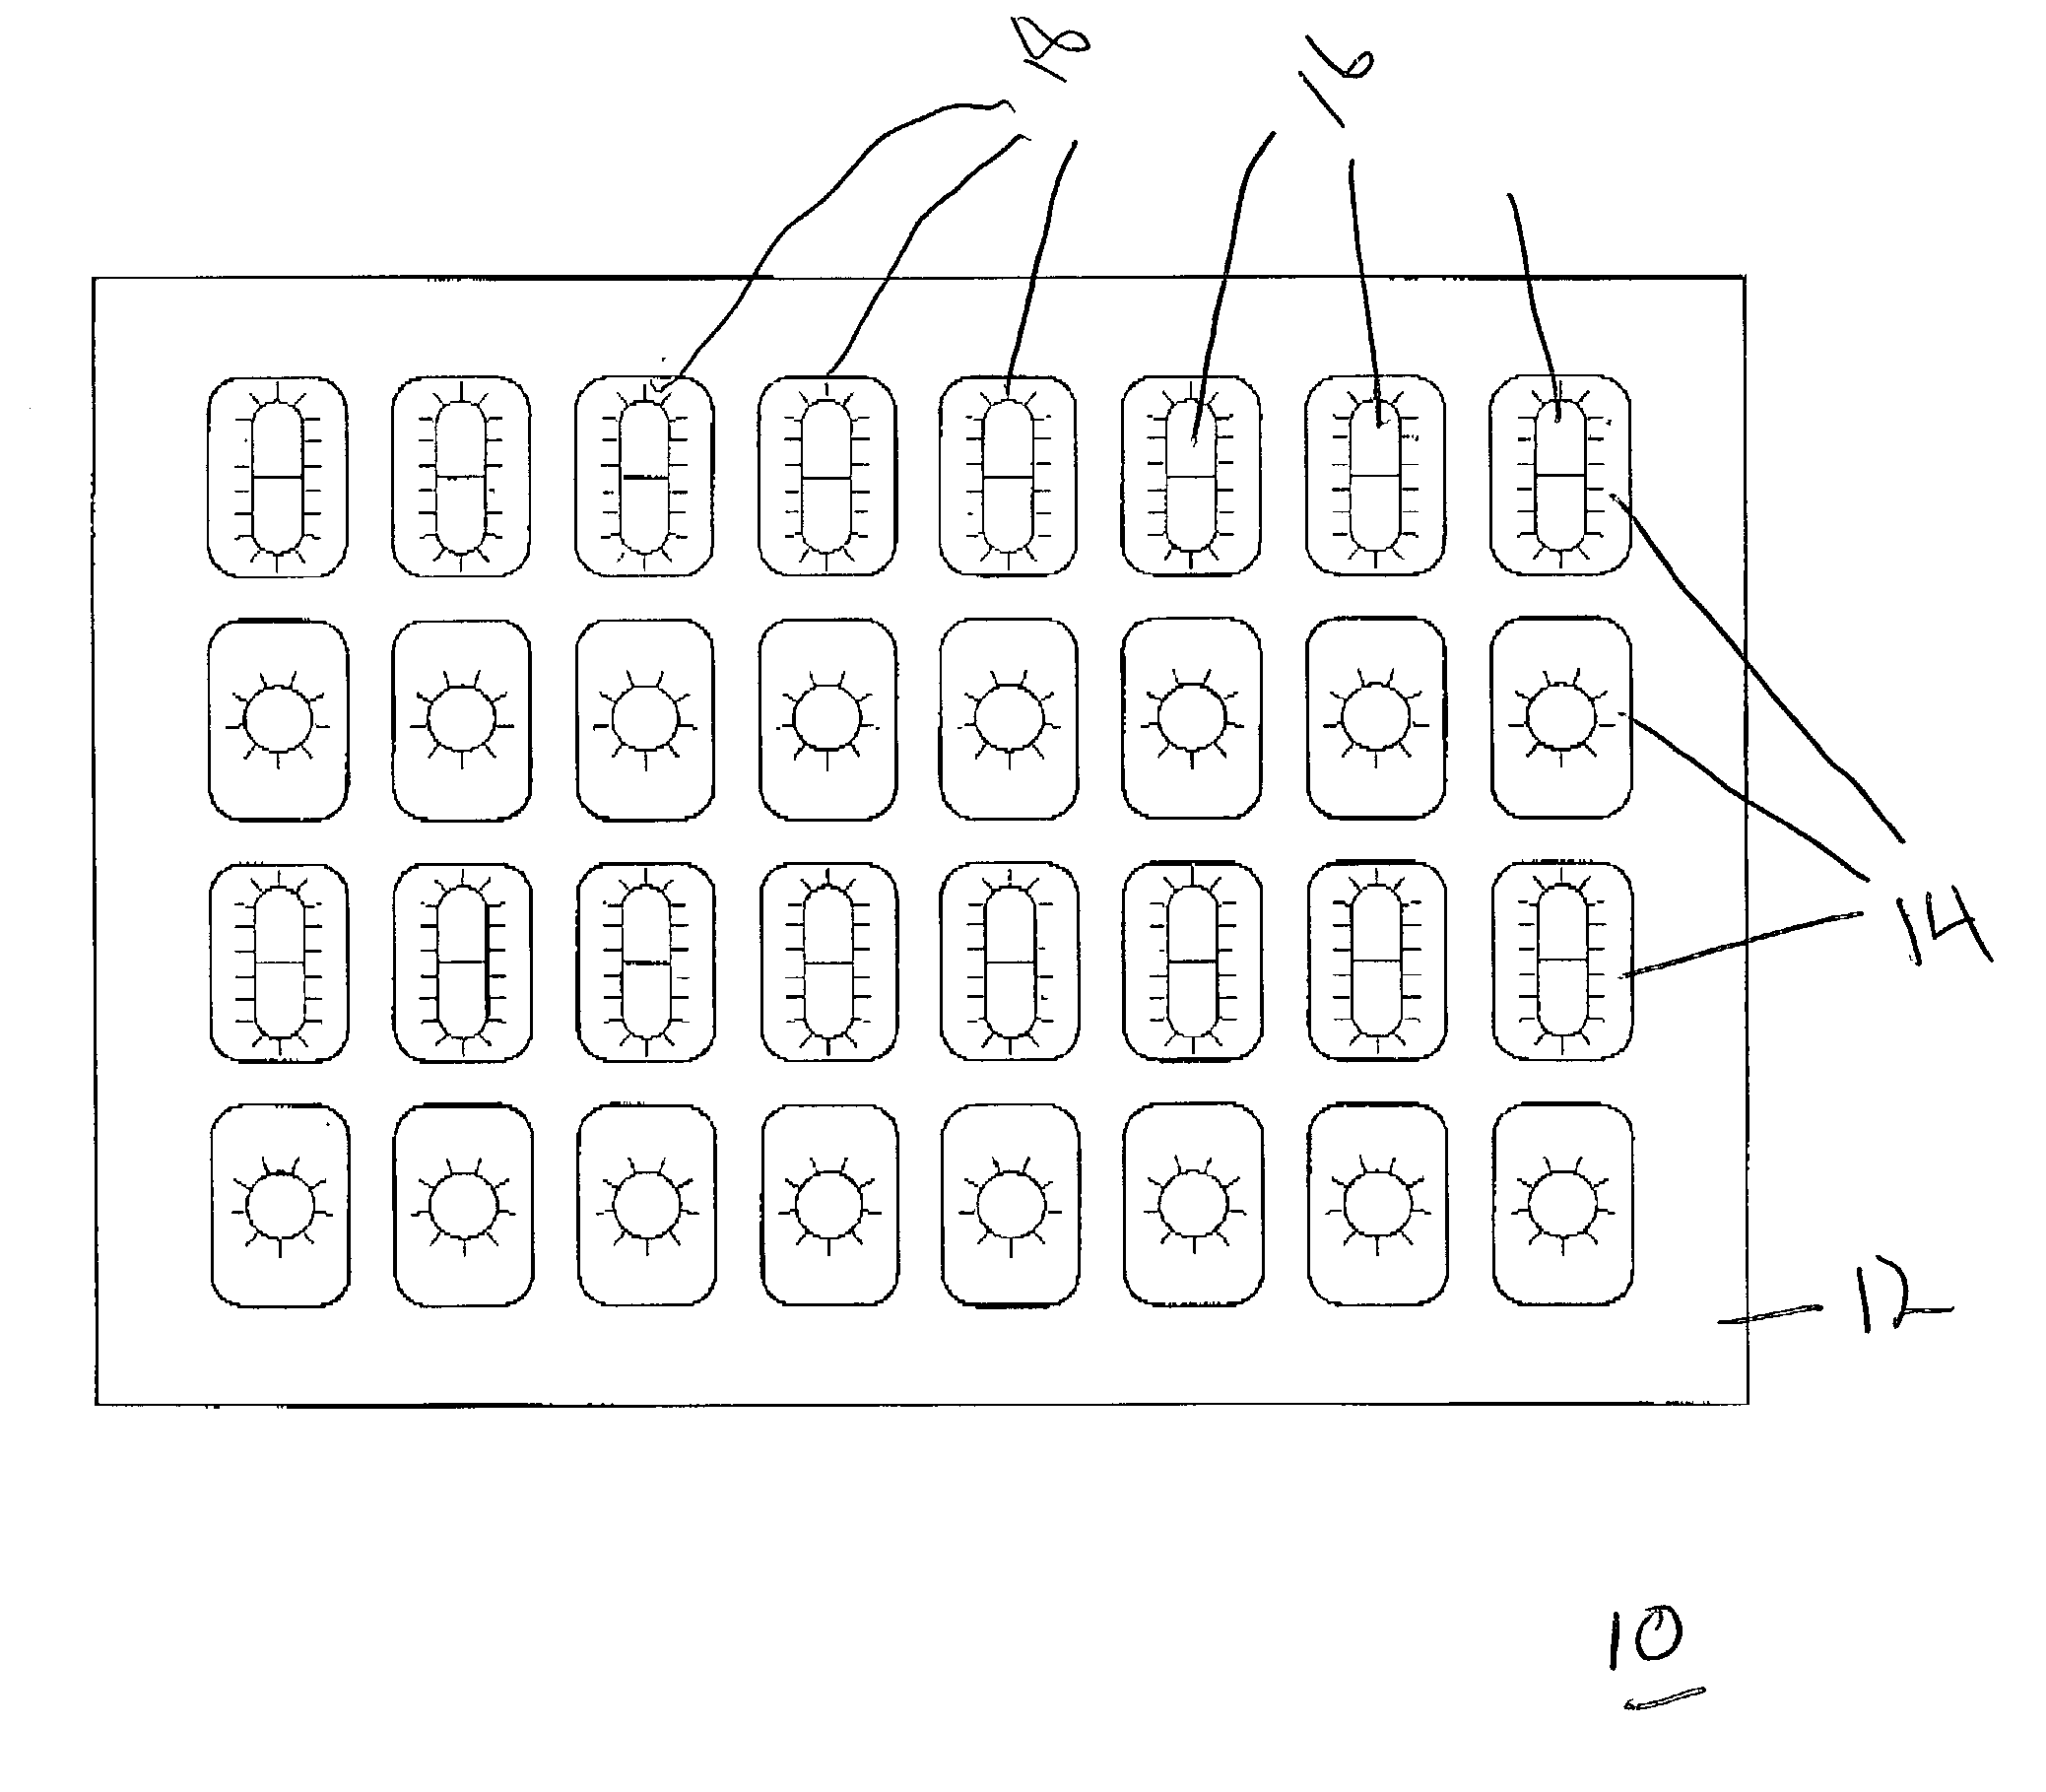 Systems and methods for forming blister packages with support members for pharmaceutical product packaging